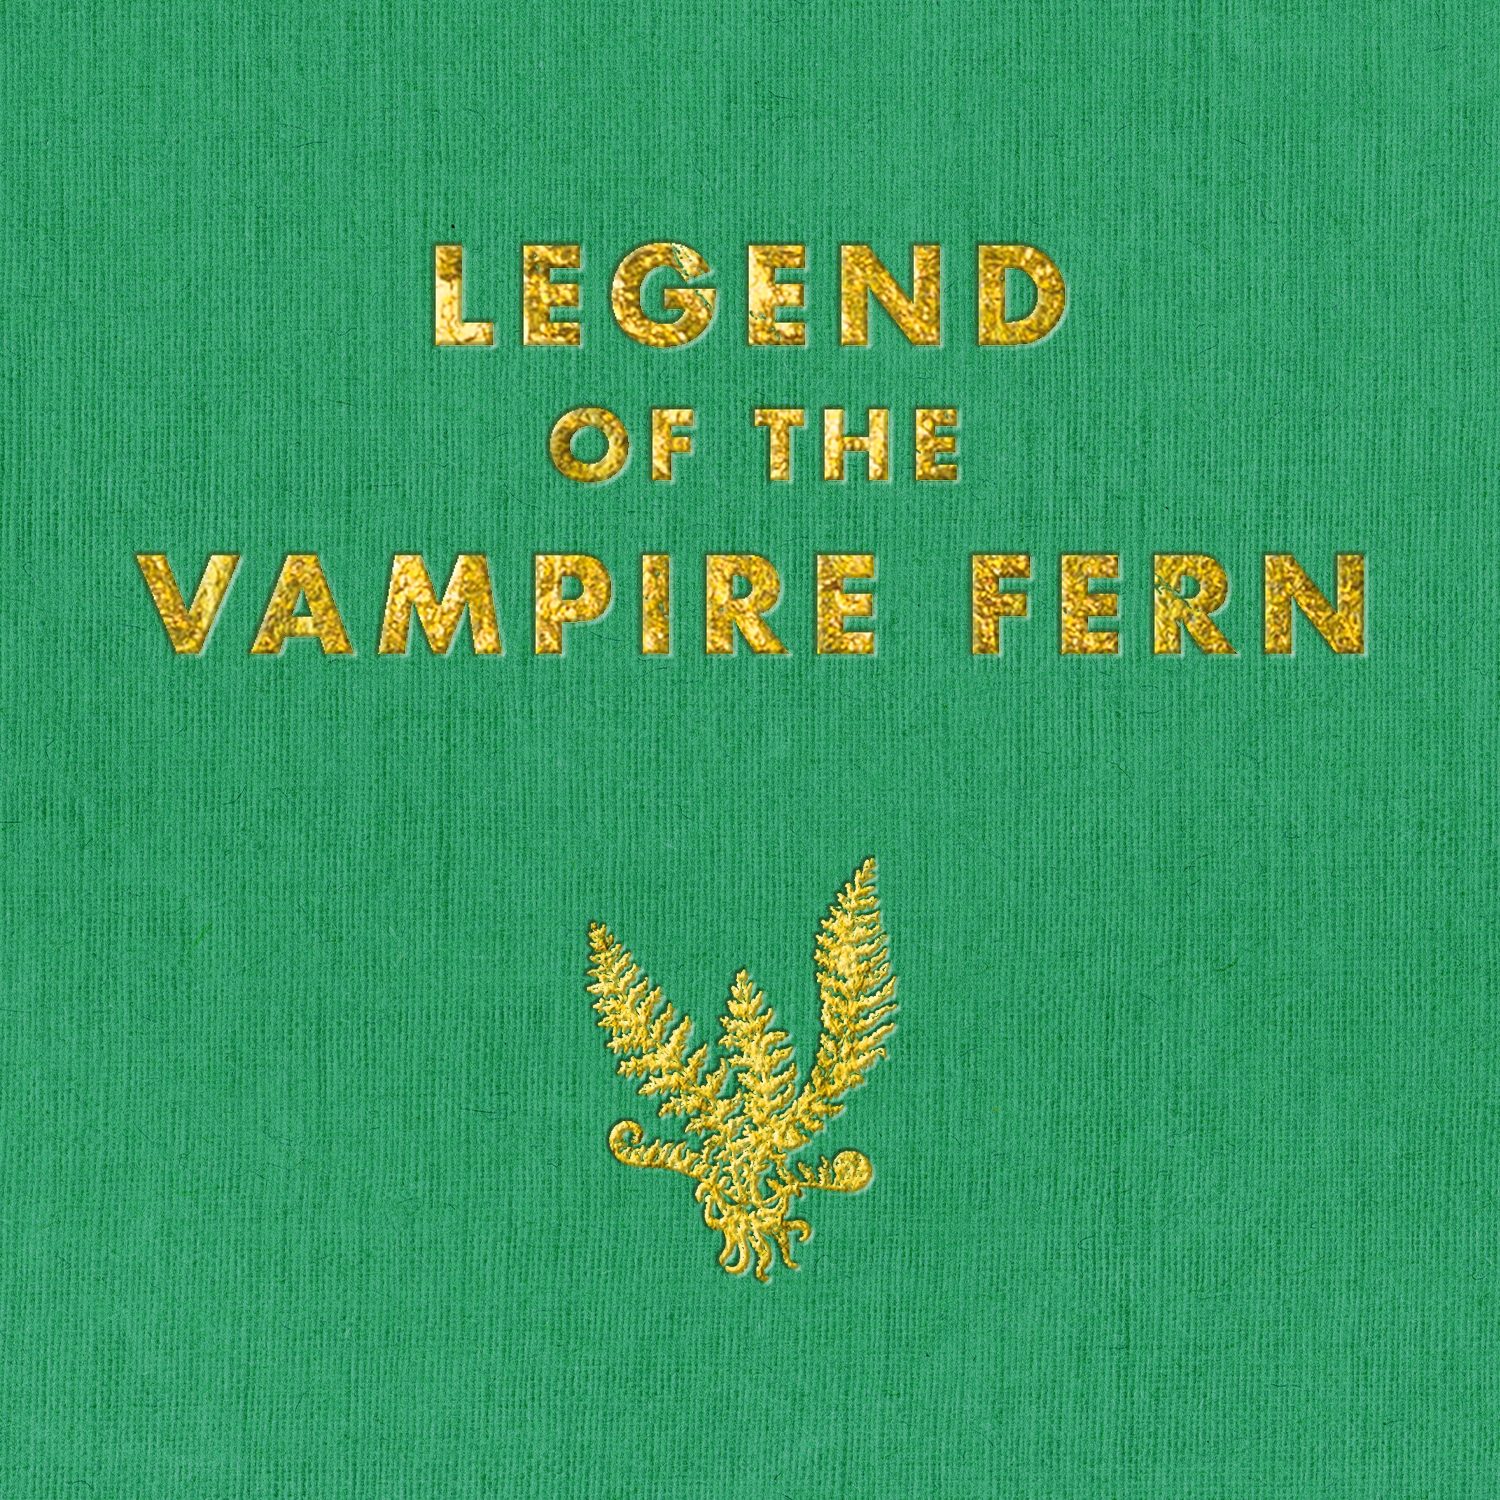 Image Description: Text in gold leaf reads, "Legend of the Vampire Fern" on top of green linen. There is a graphic of a fern with tentacles for roots, also in gold leaf.